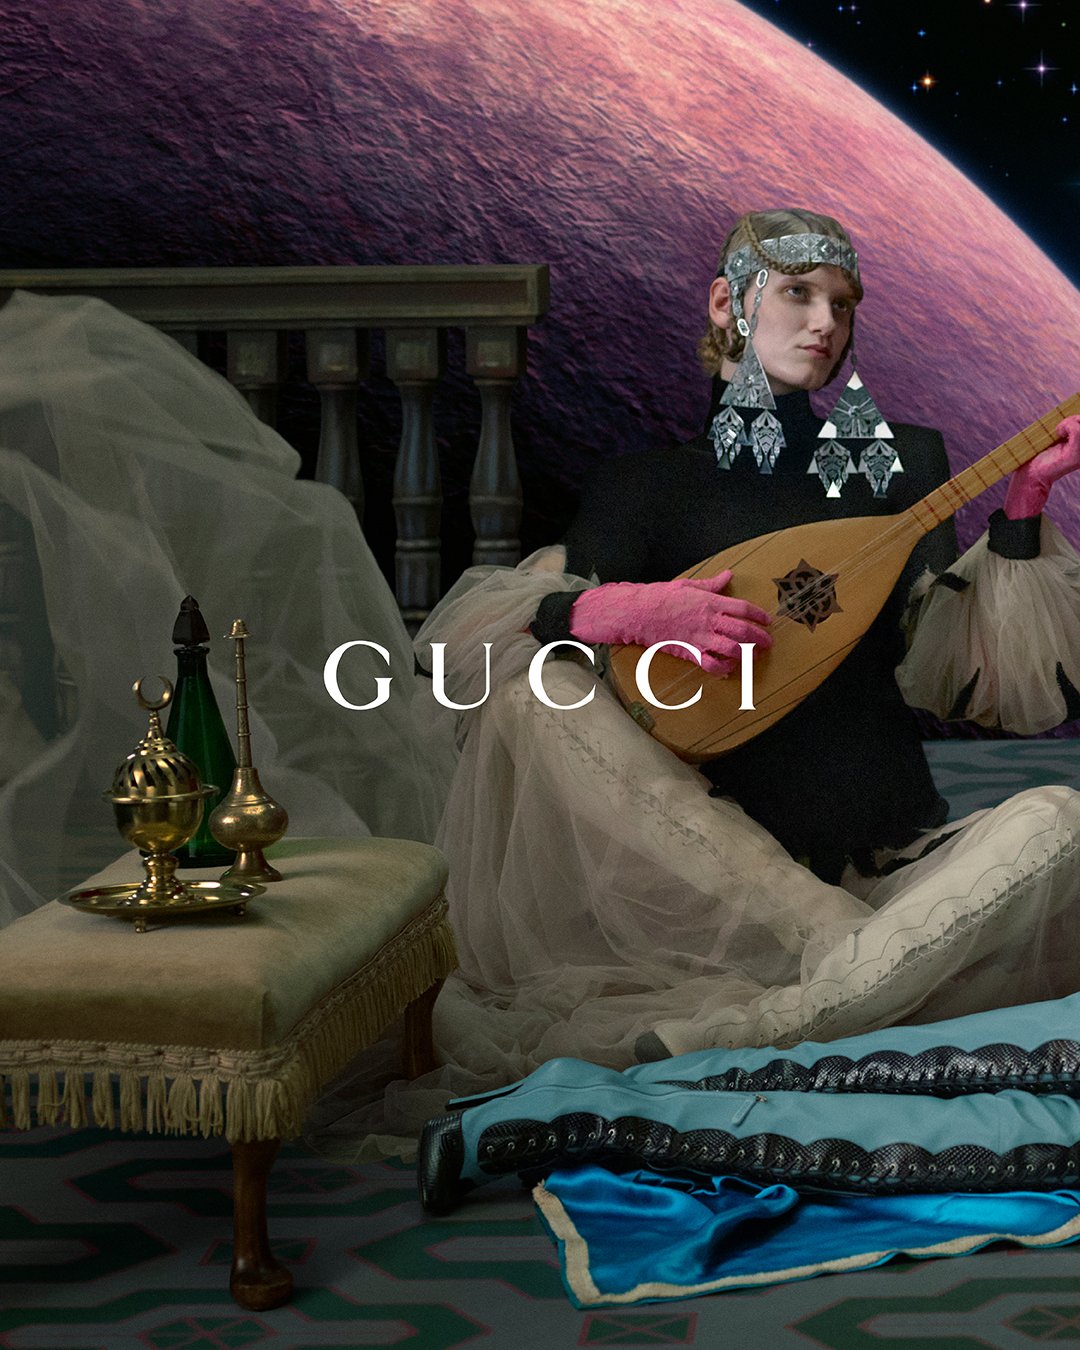 Gucci-2023-Cruise-Campaign-by-Mert-Marcus-00001.jpg